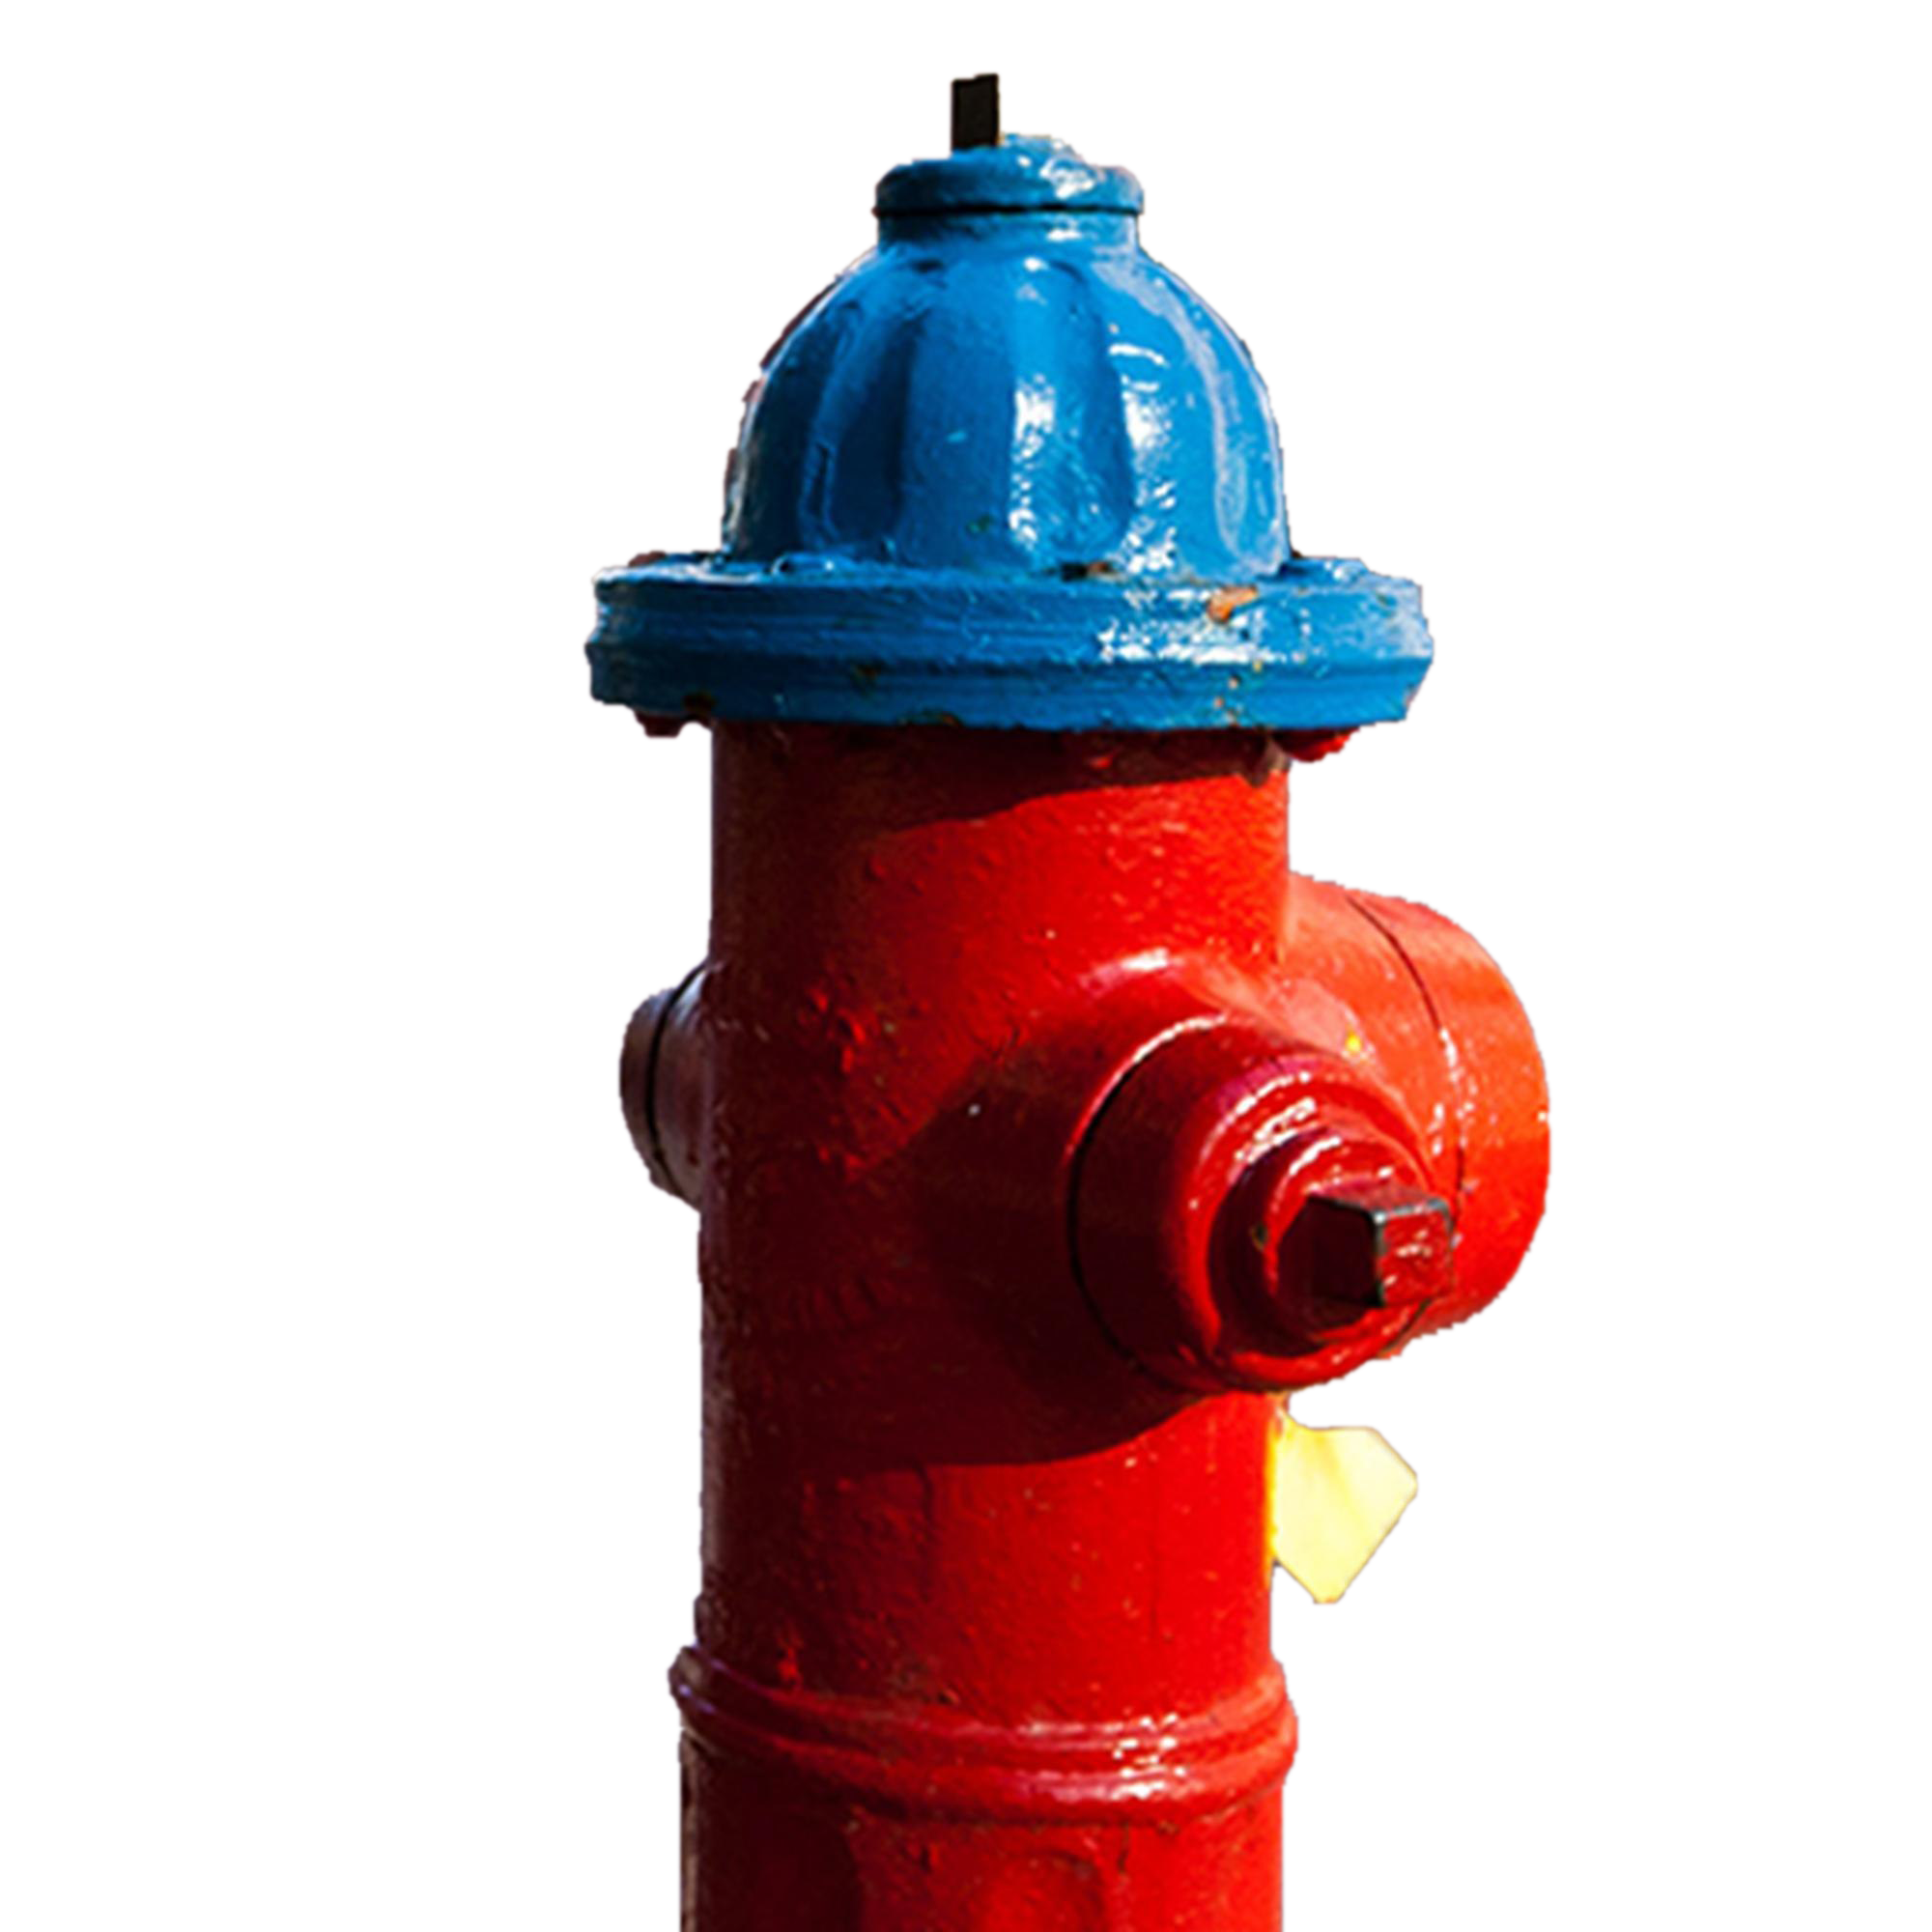 Fire Hydrant Png Images Transparent Background Png Play